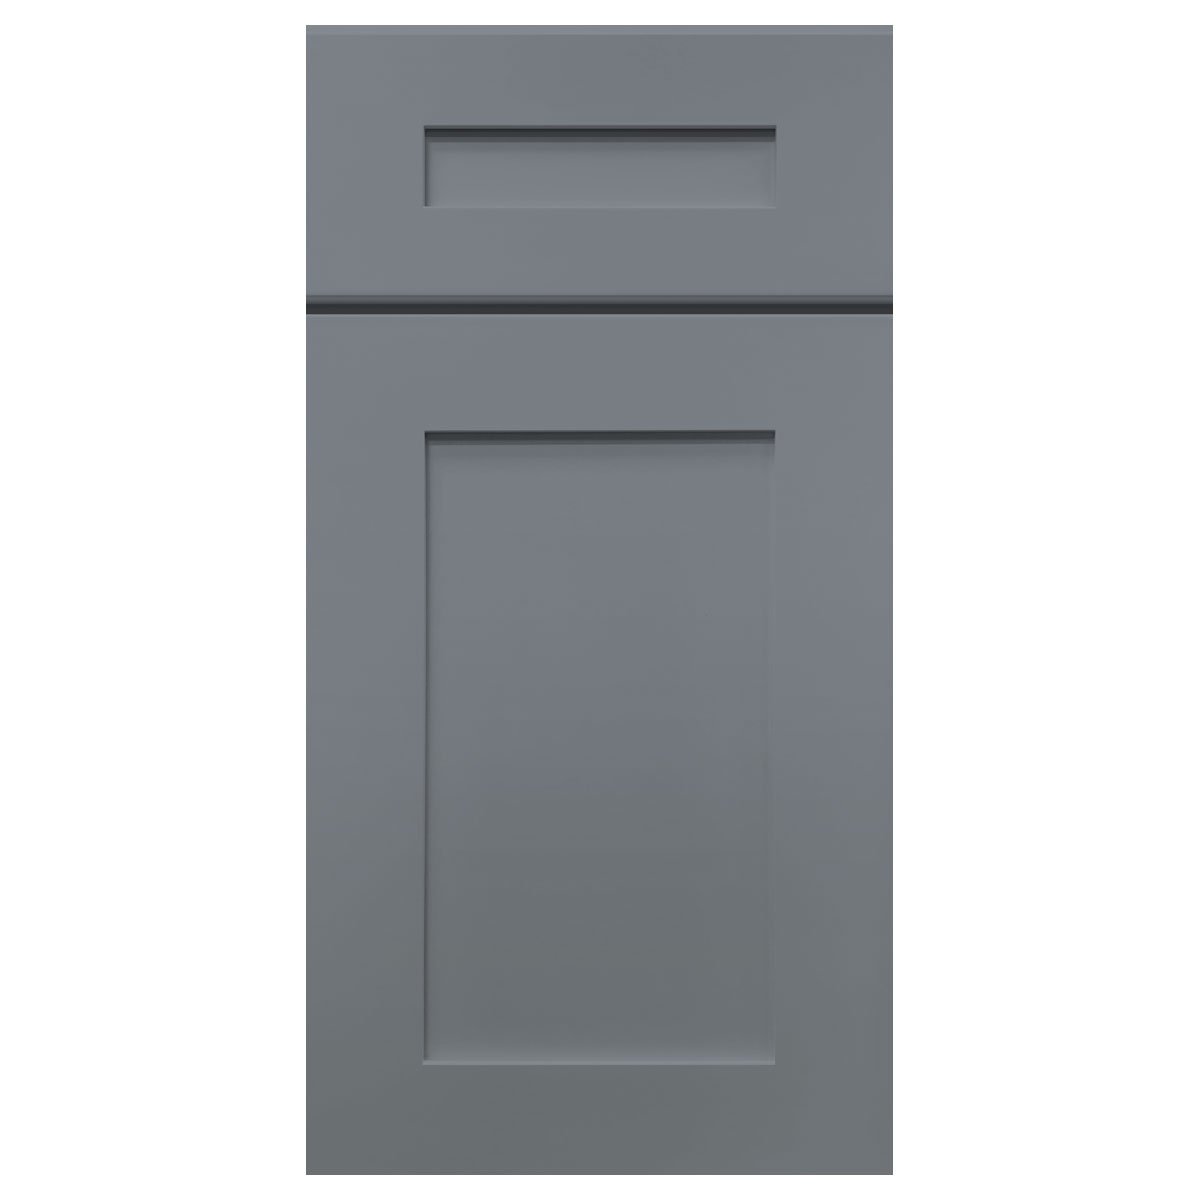 Base Kitchen Cabinet B09 Colonial Gray LessCare 9 in. width 34.5 in ...